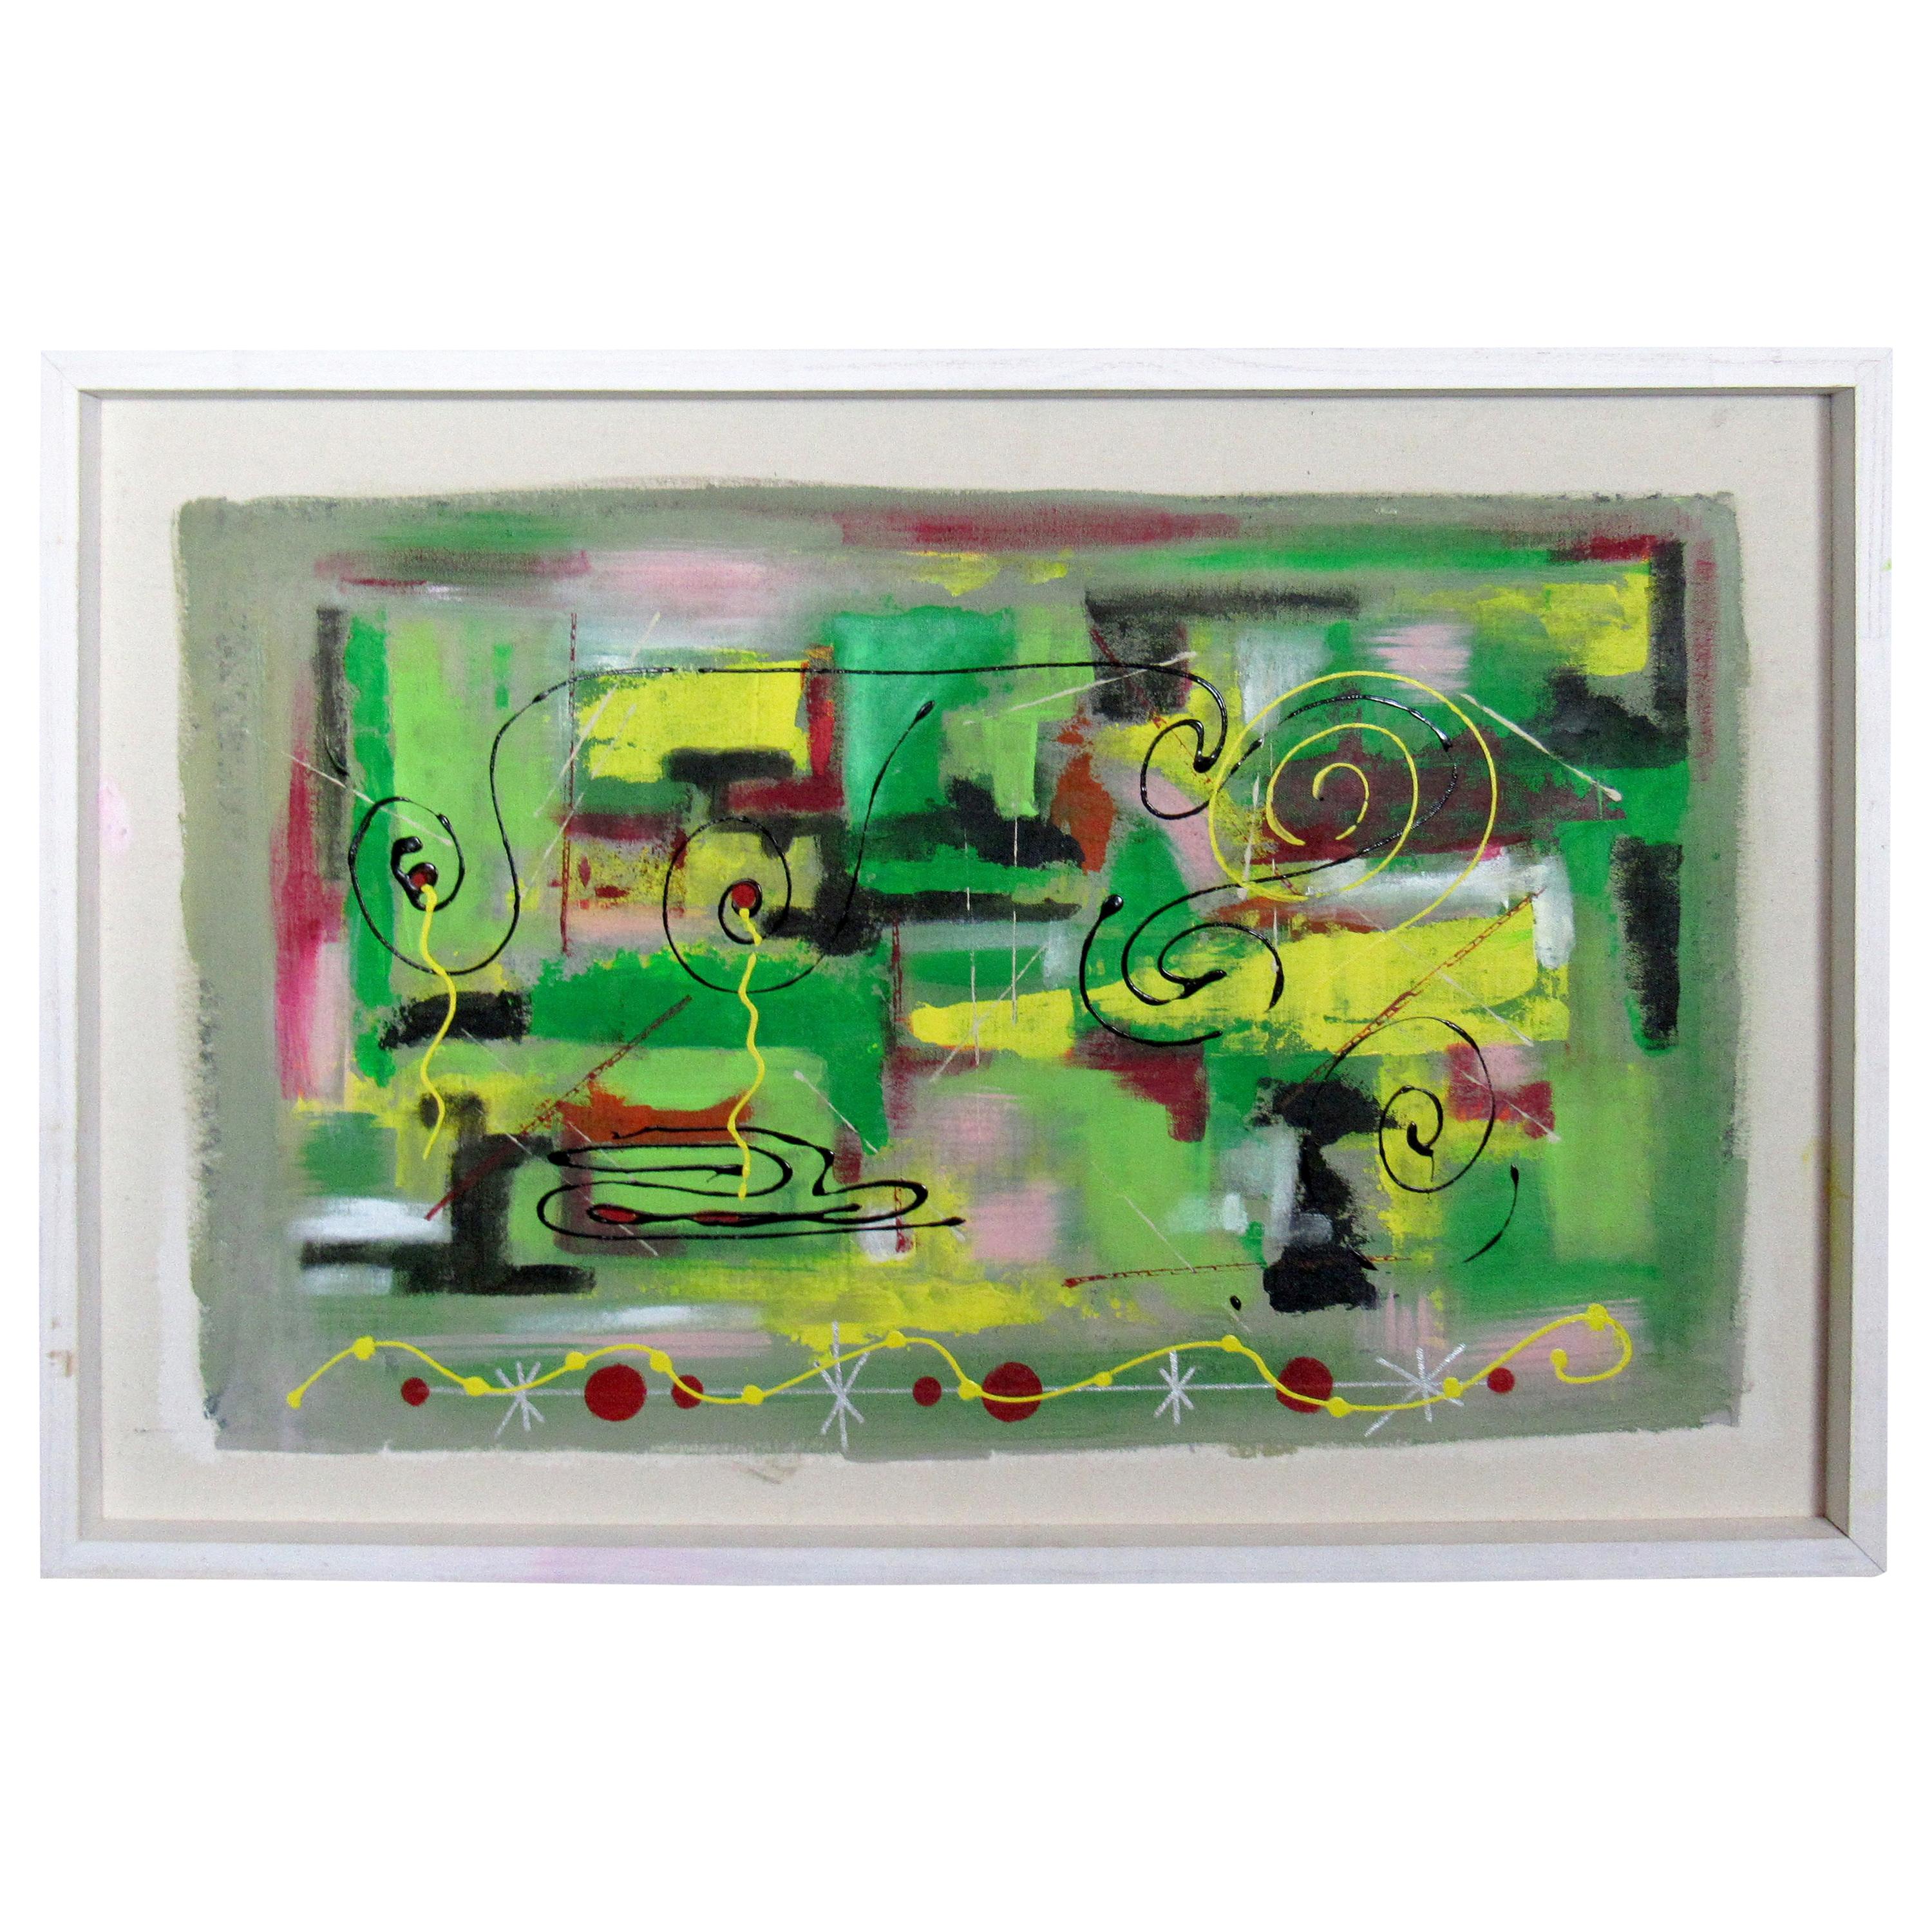 Abstract Painting Signed "Zumba"